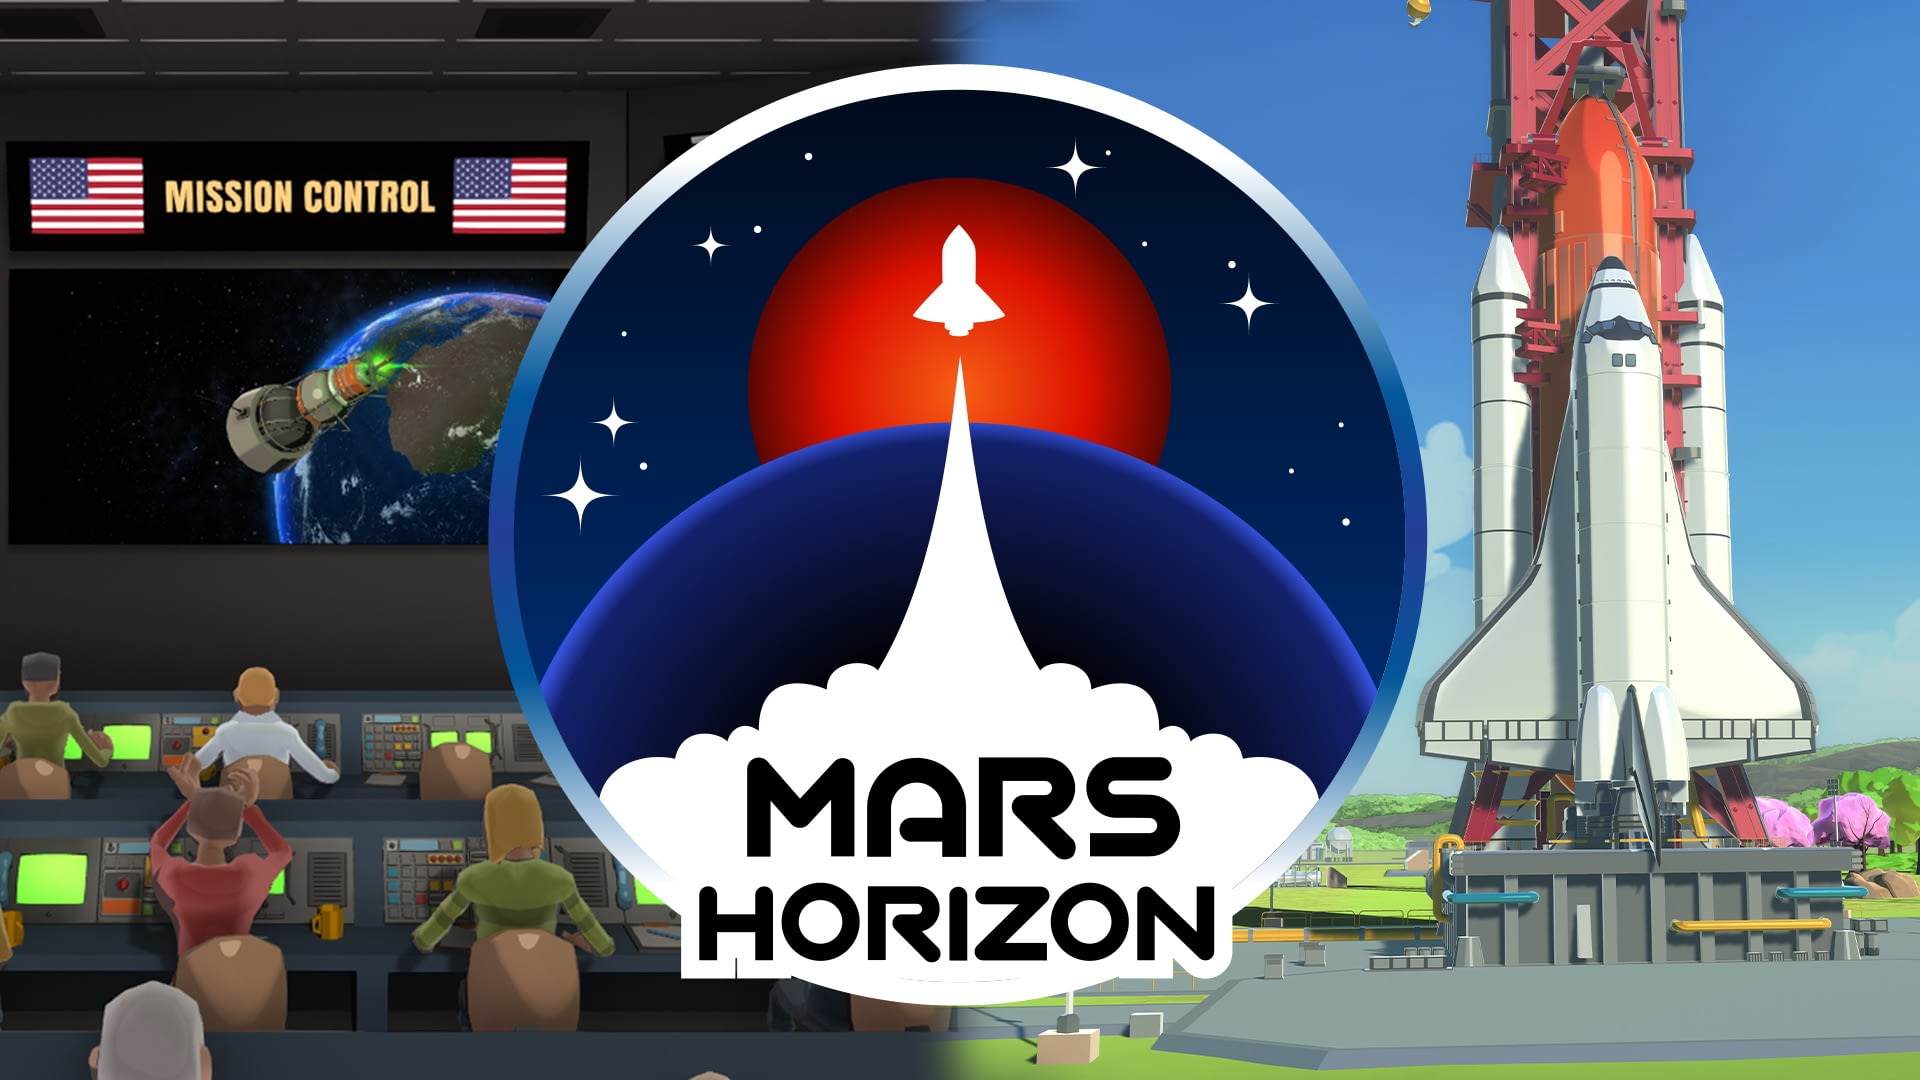 Create your own space program with Mars Horizon